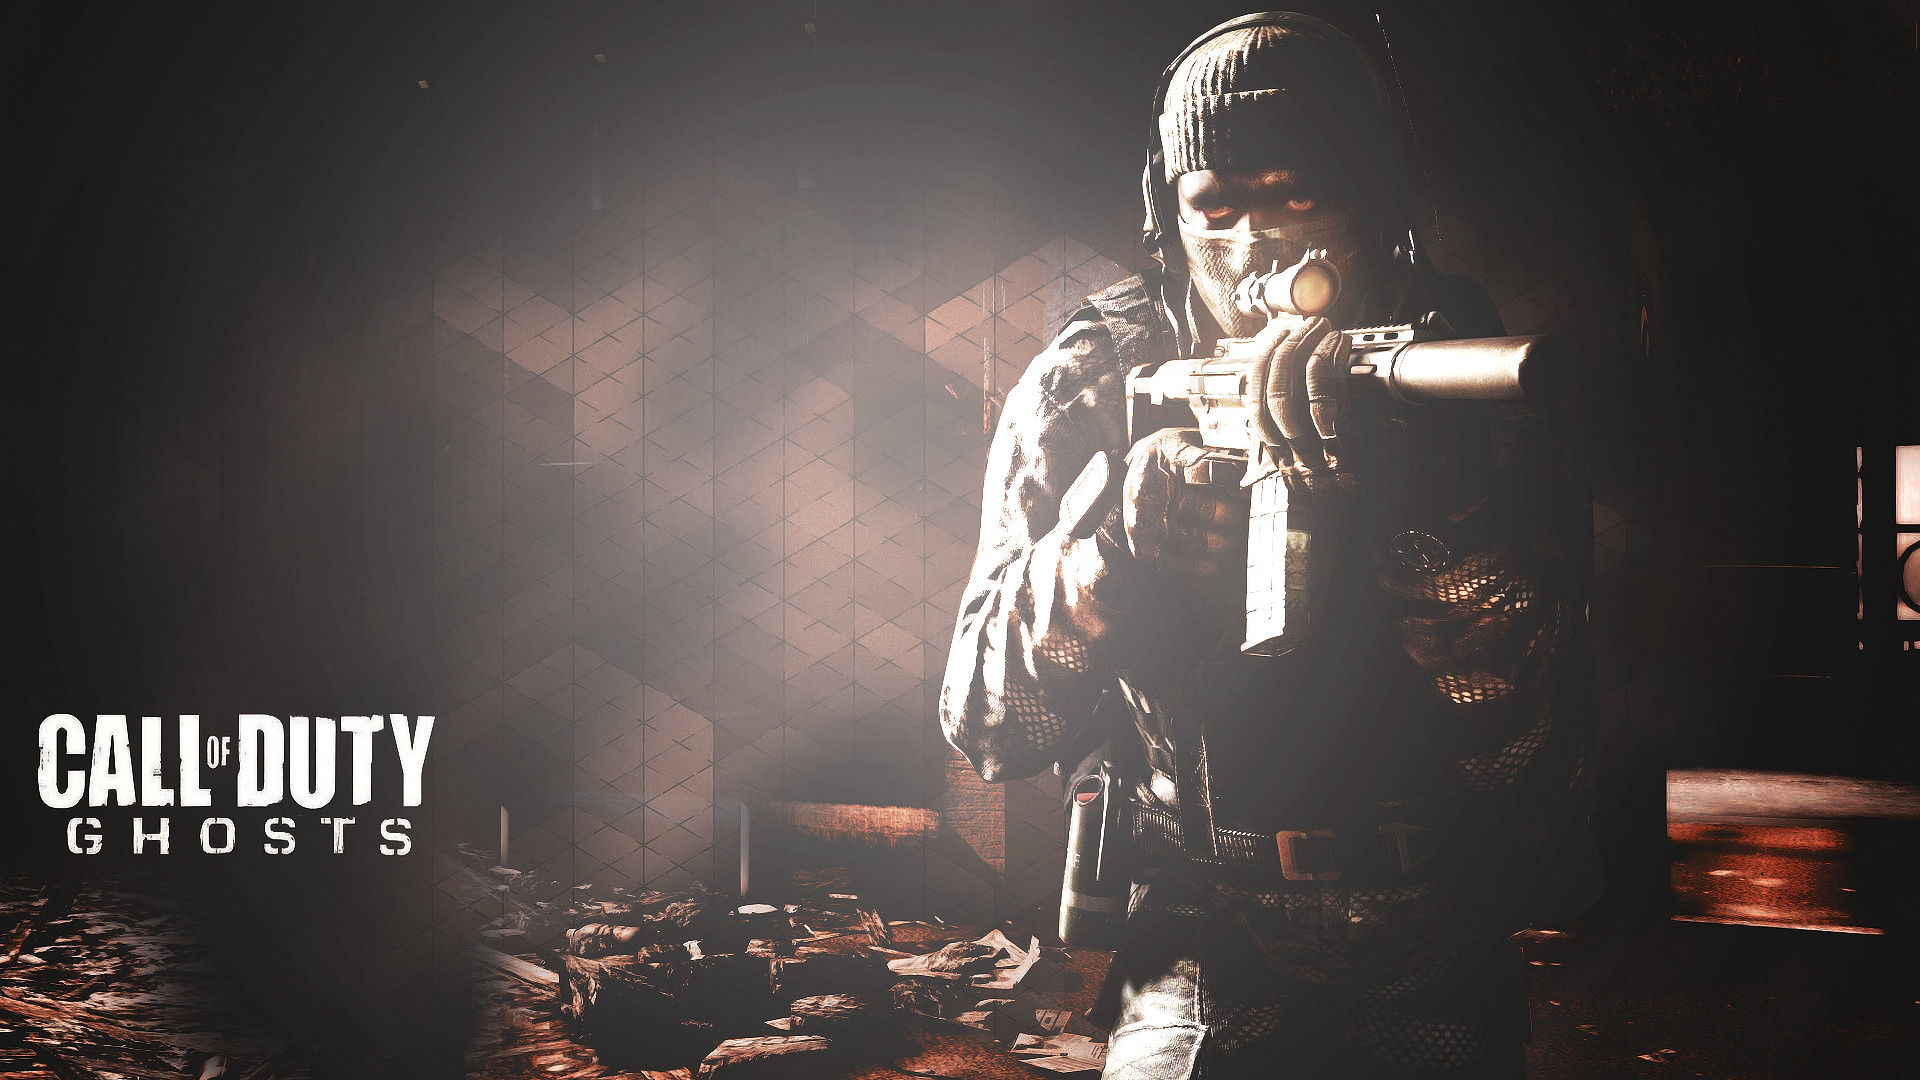 Call Of Duty Ghost Wallpaper.